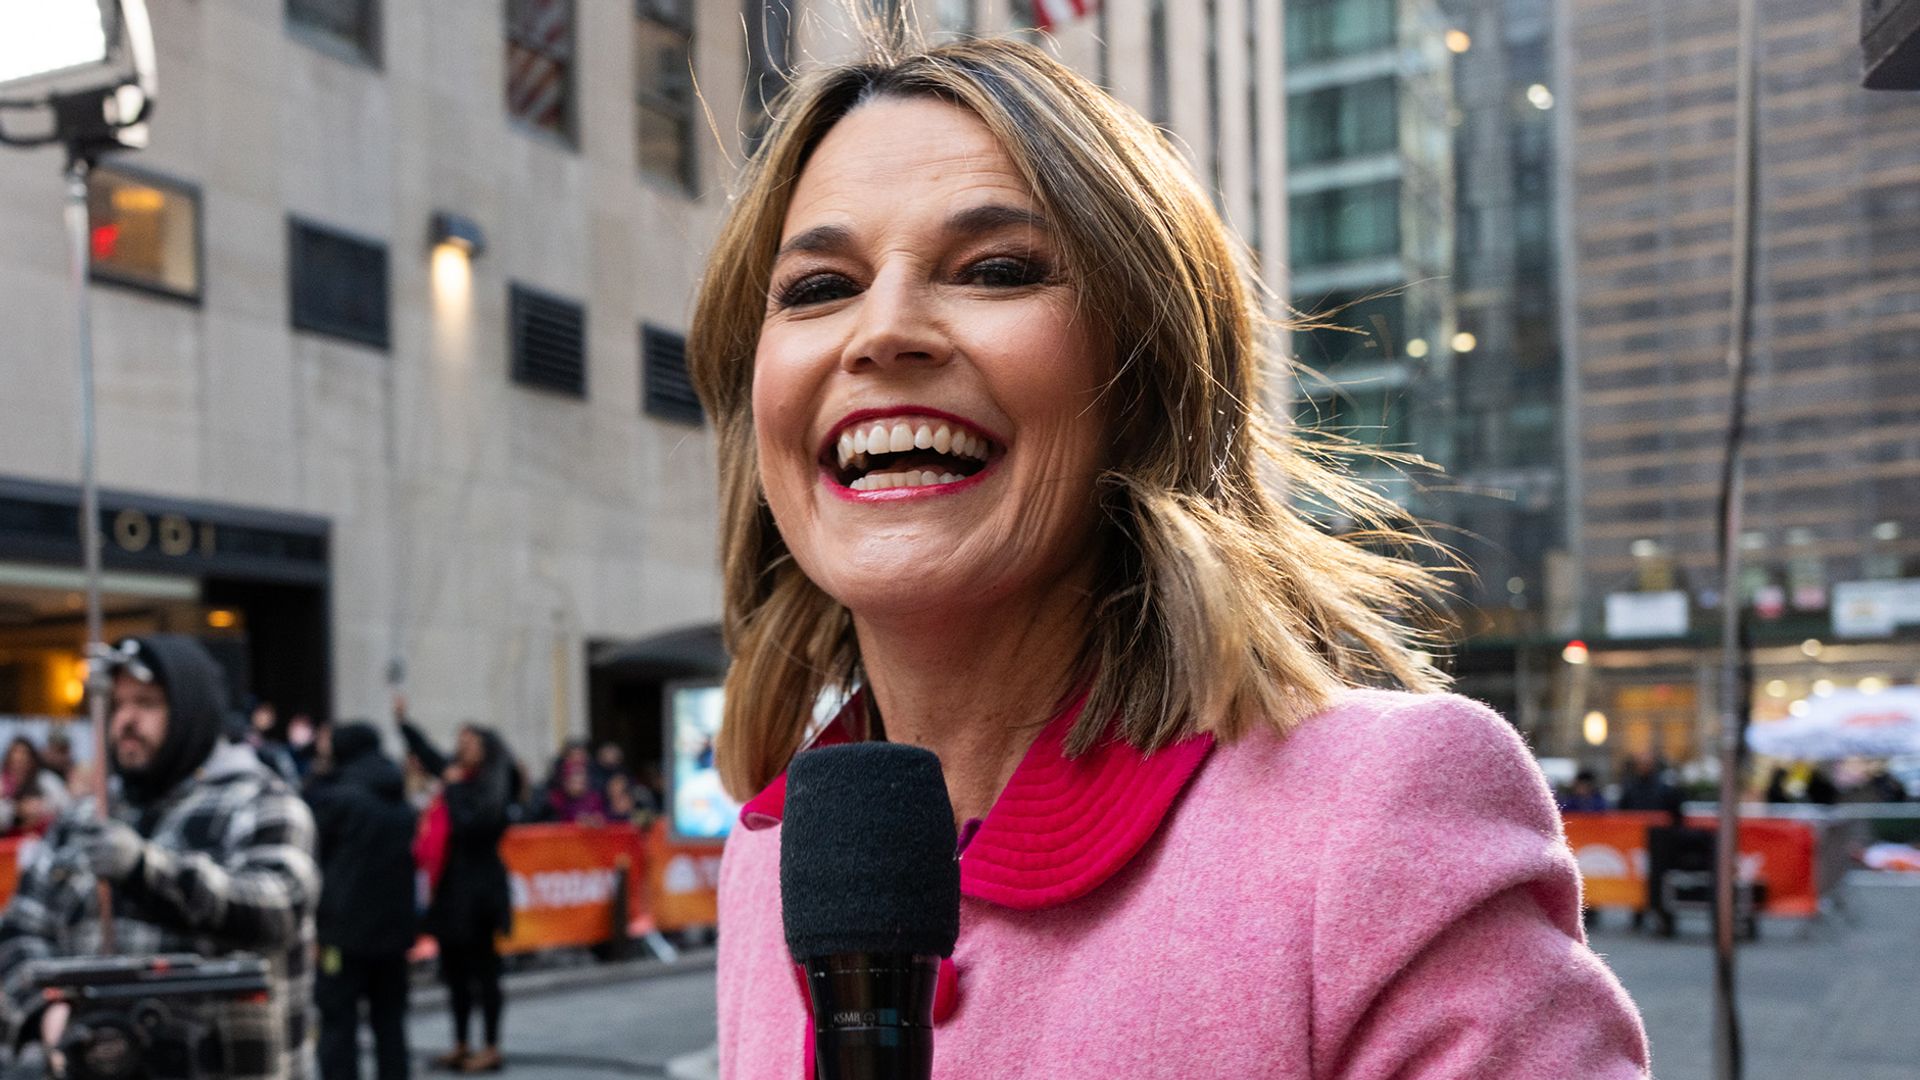 Savannah Guthrie says she's landed unexpected gig in 'breaking news' post